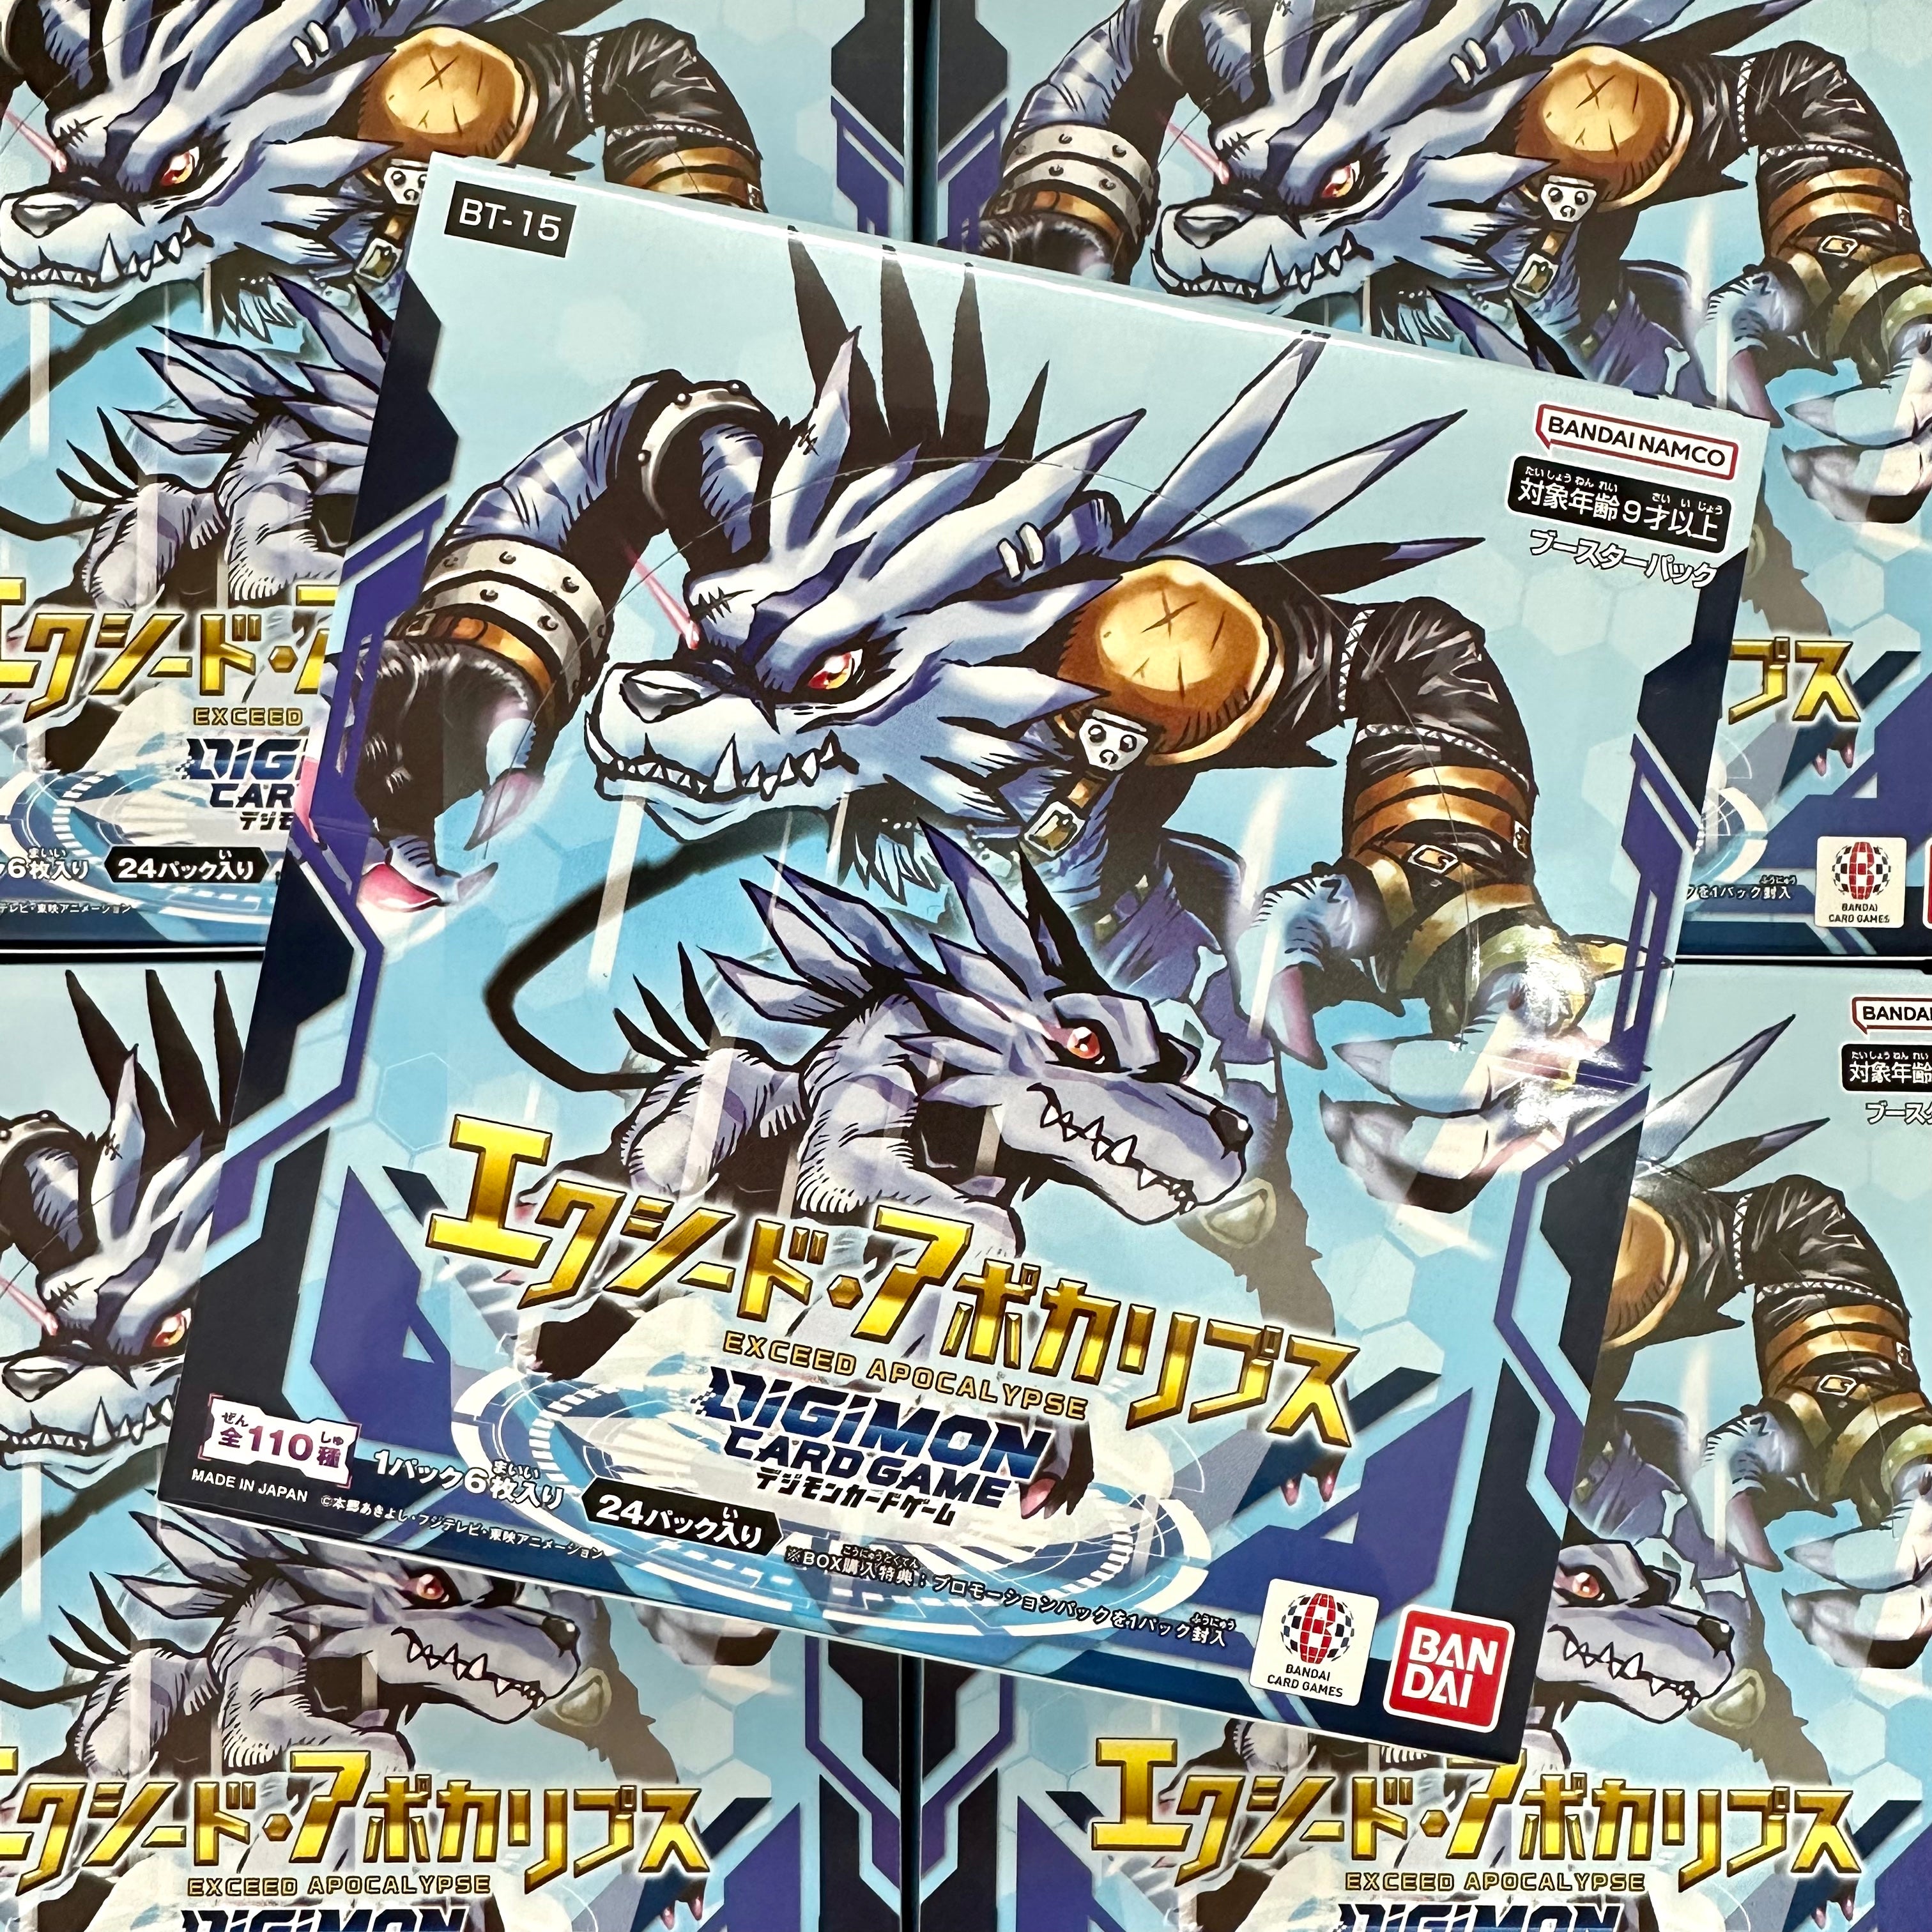 DIGIMON CARD GAME [BT-15] EXCEED APOCALYPSE - Box